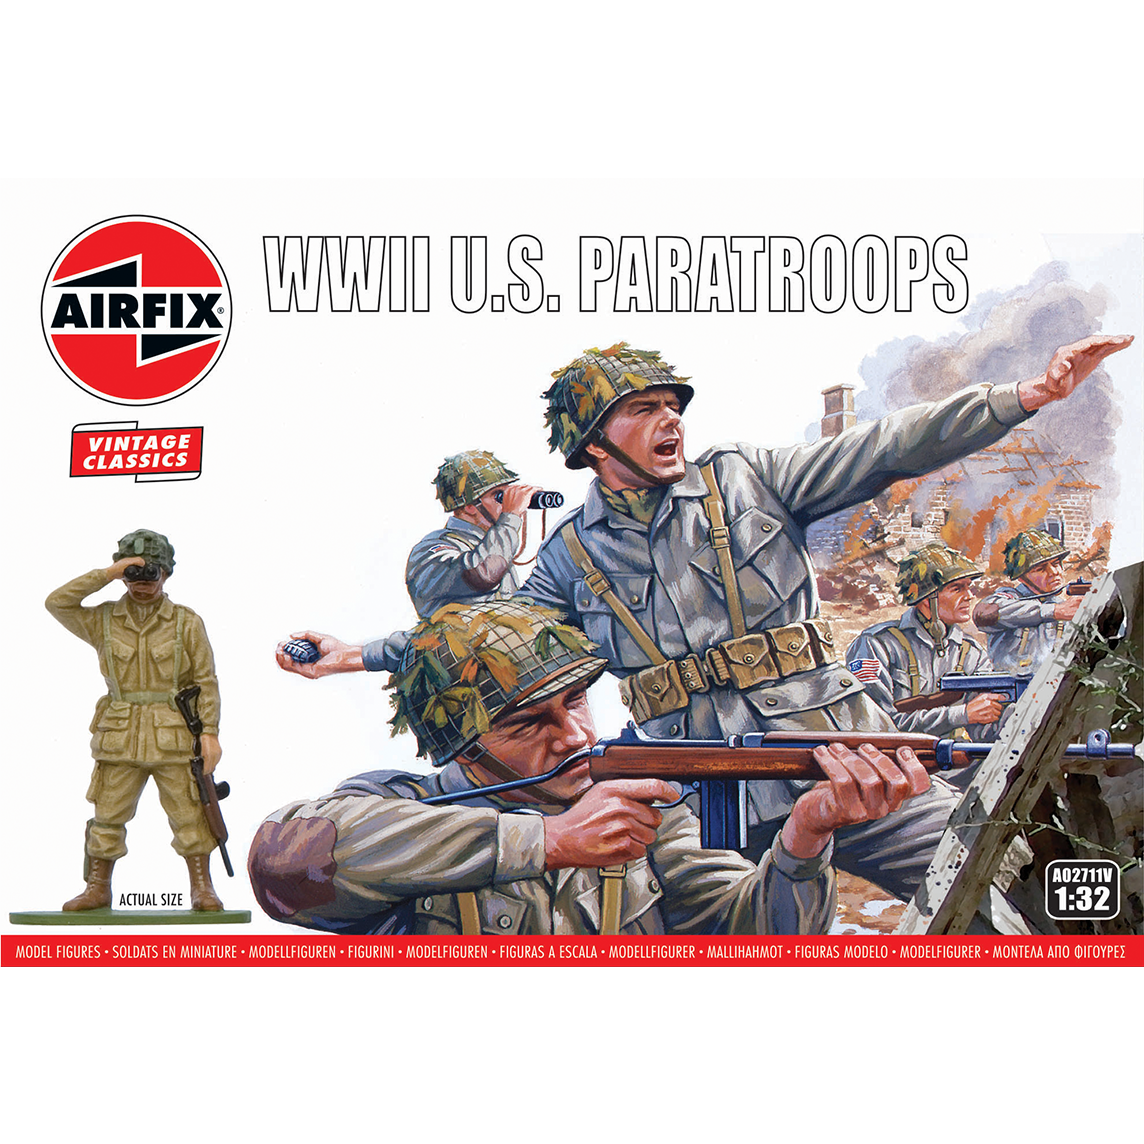 AIRFIX 1/32 WWII U.S. Paratroops